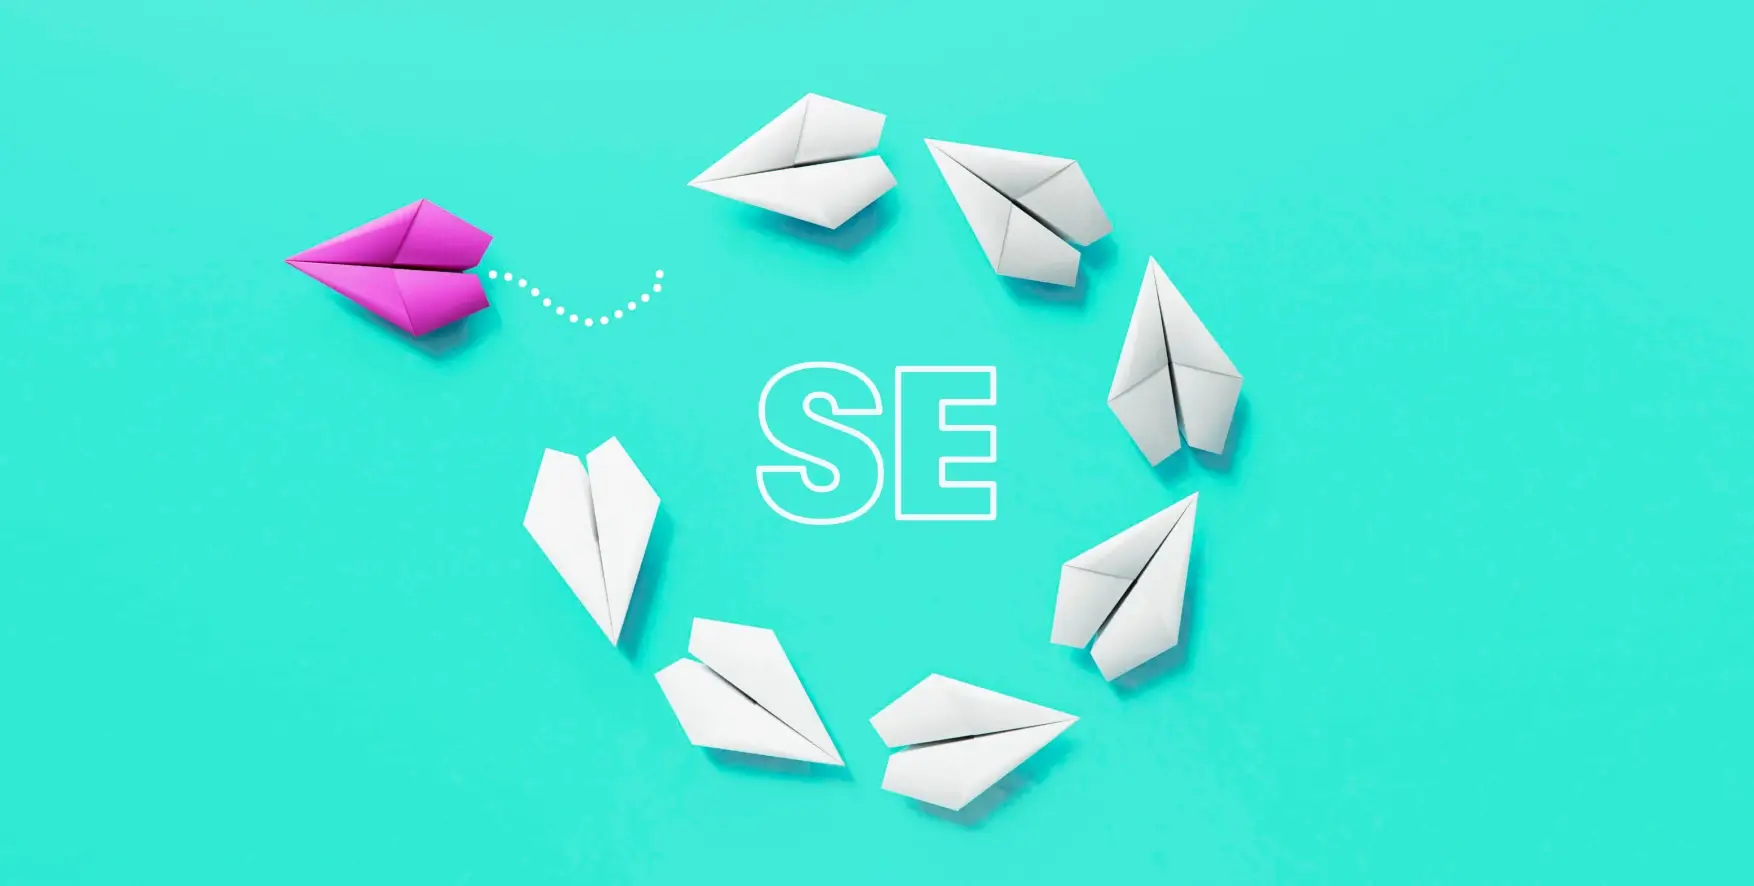 paper airplanes fly around the Selenium logo